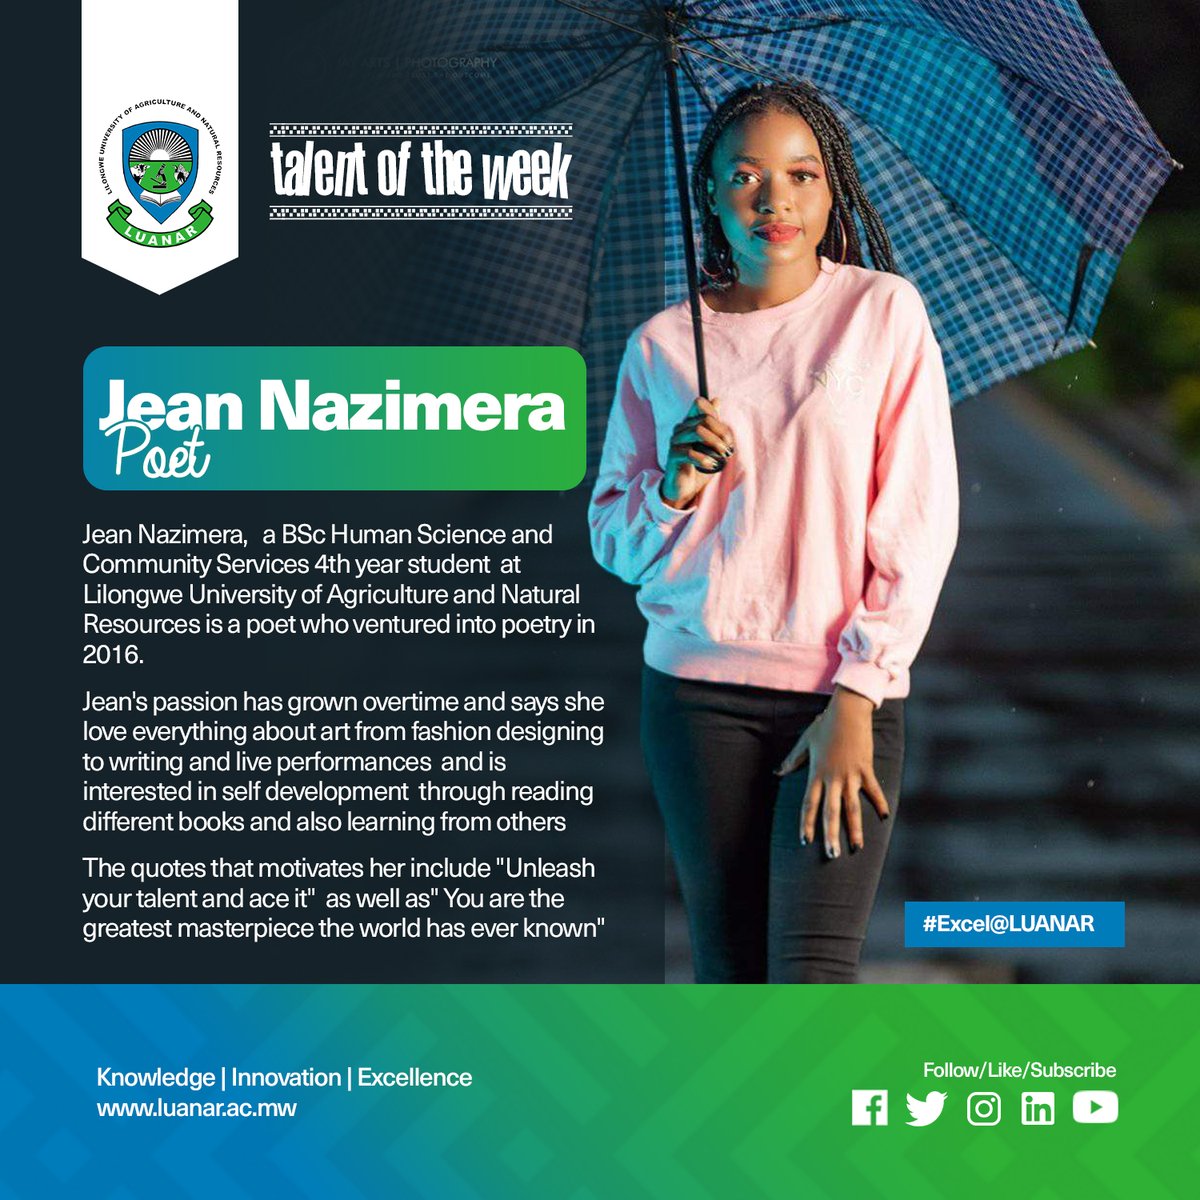 #talentoftheweek
Introducing Jean Nazimera: The Poetic Soul!

Meet our featured talent, Jean Nazimera, Meet Jean a gifted poet whose words transcend the ordinary and touch the divine. Currently in her final year at LUANAR, Jean embarked on her poetic odyssey in 2016, and since…